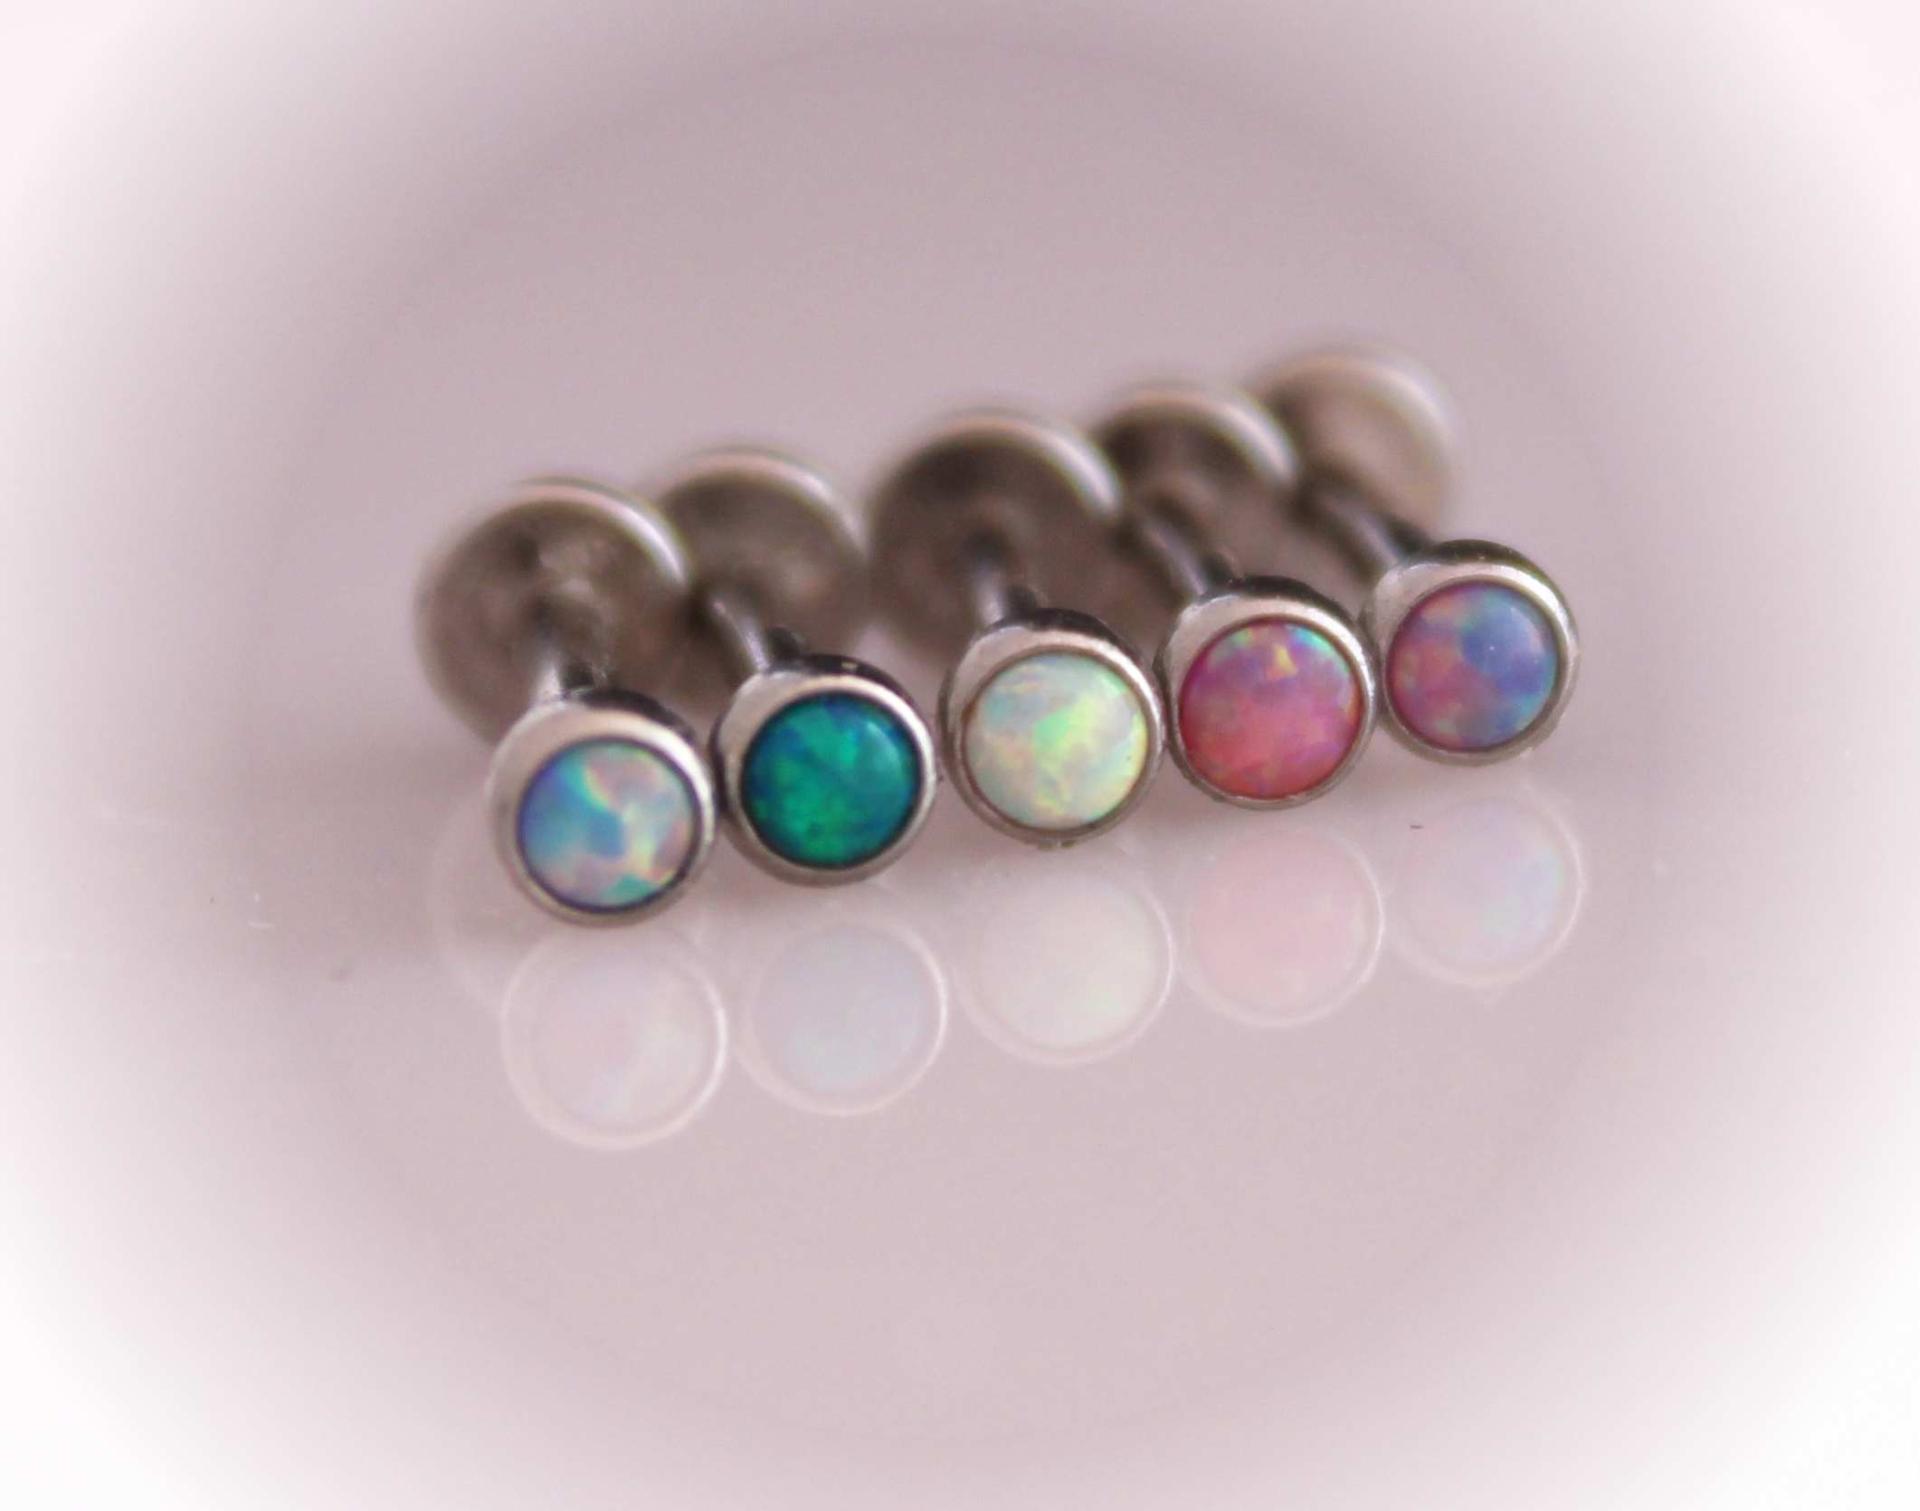 Opal Labret Studs - Body Jewellery 16G - Choice of Opal Colour